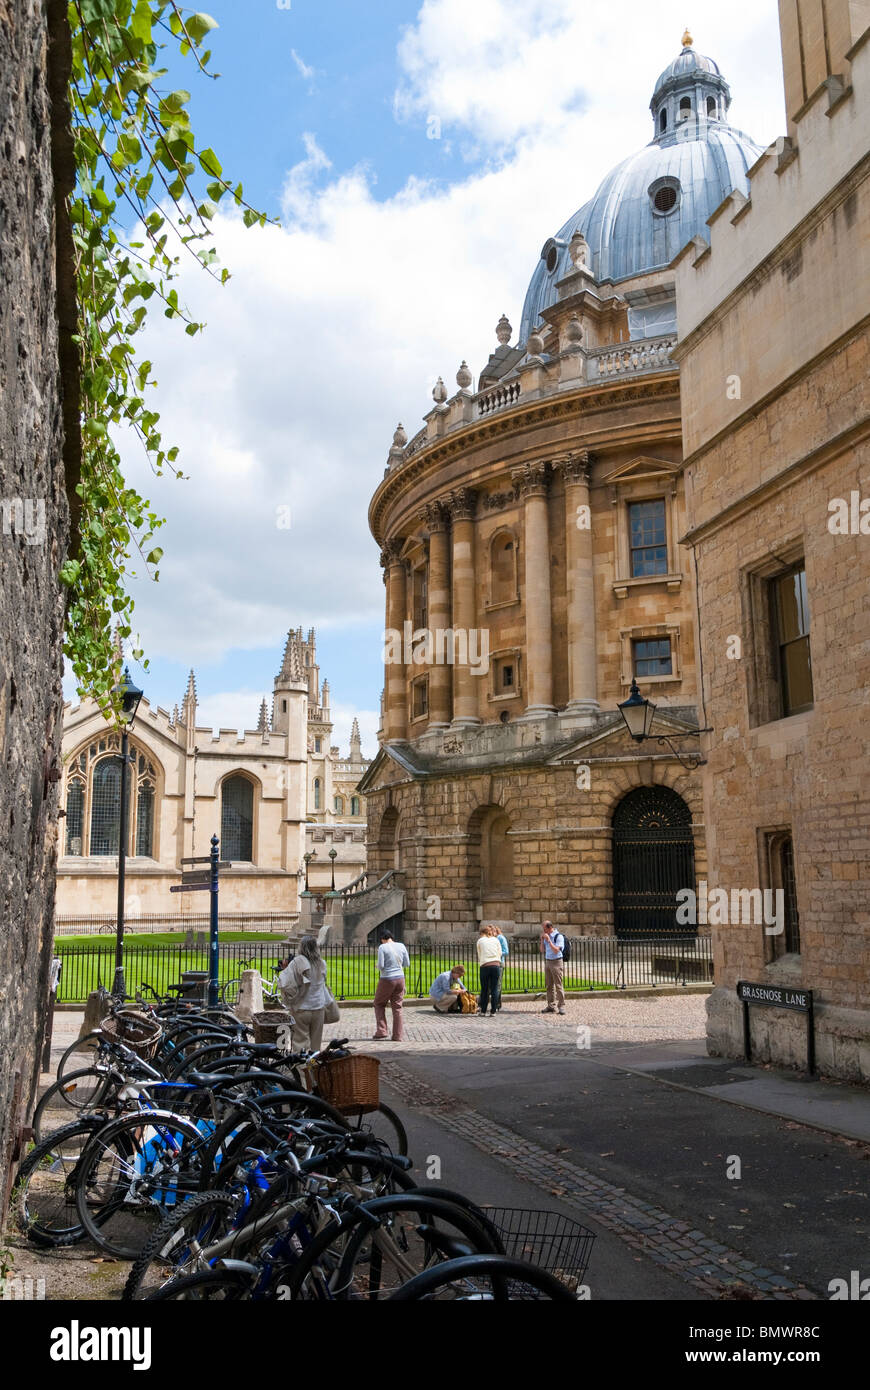 Bicycles parked in Brasenose Lane near the Radcliffee Camera and All Souls College Oxford Stock Photo